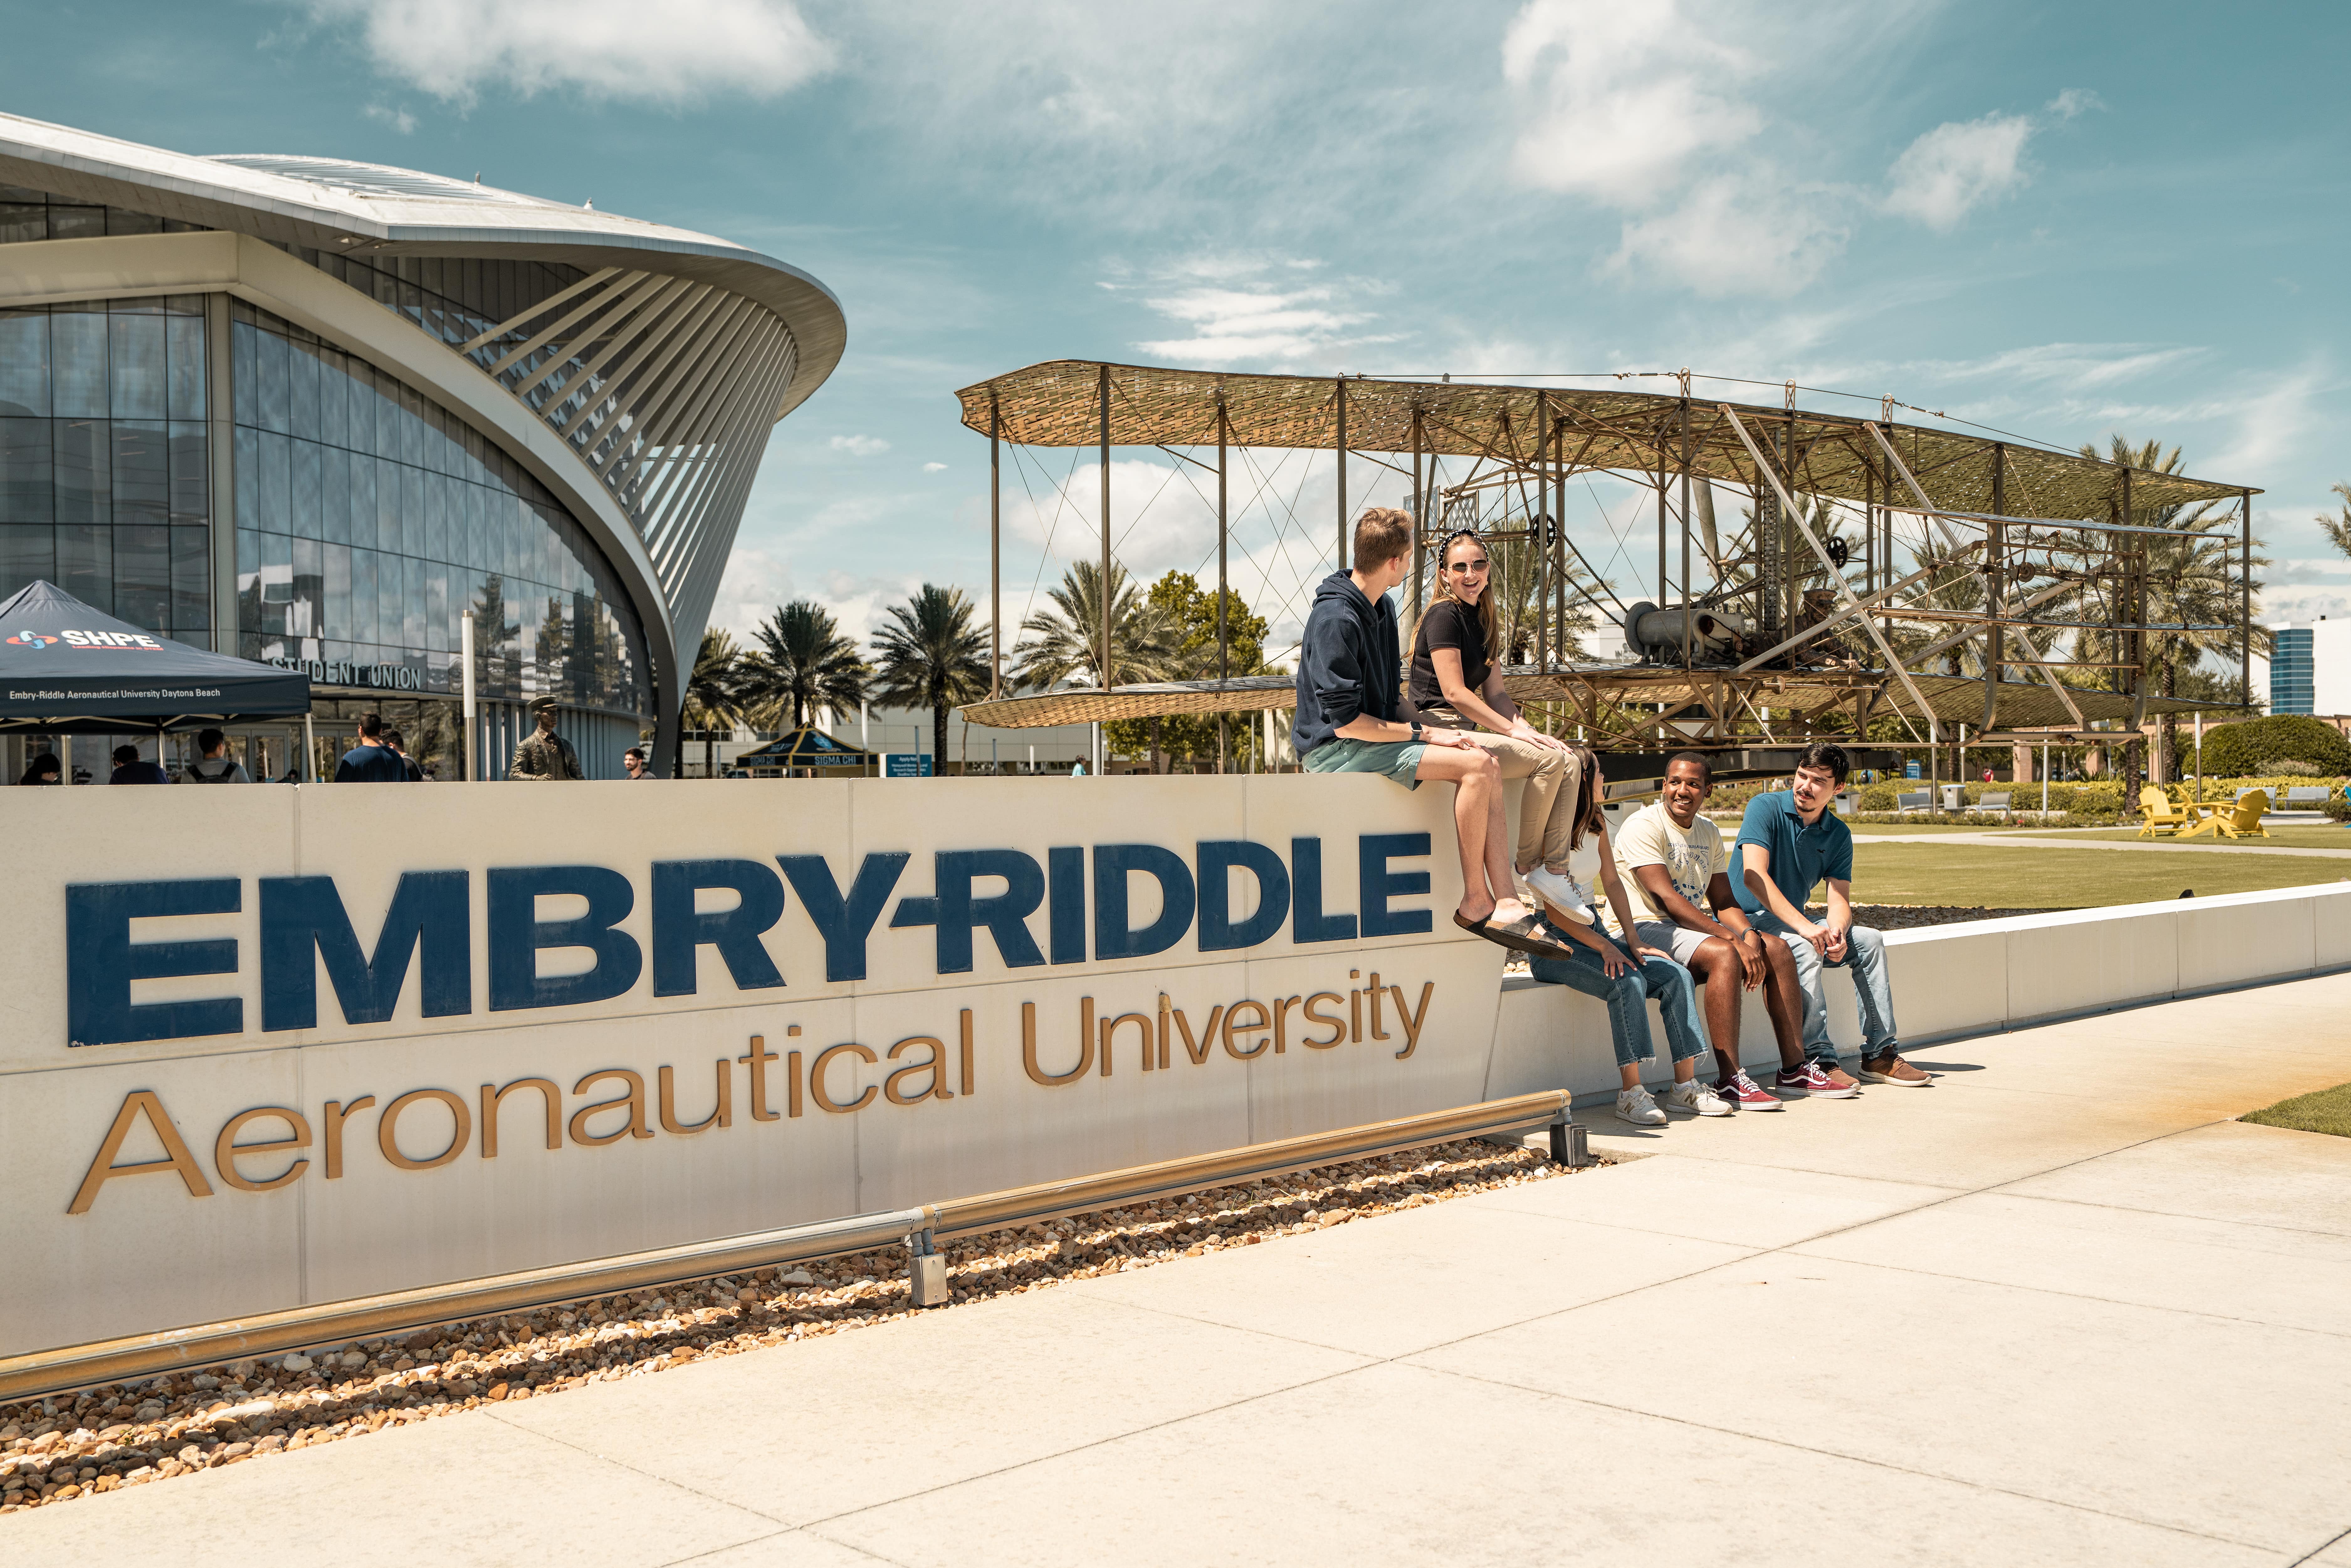 Several students sit on the Embry-Riddle monument sign at the Daytona Beach campus. A vintage biplane is seen in the background.